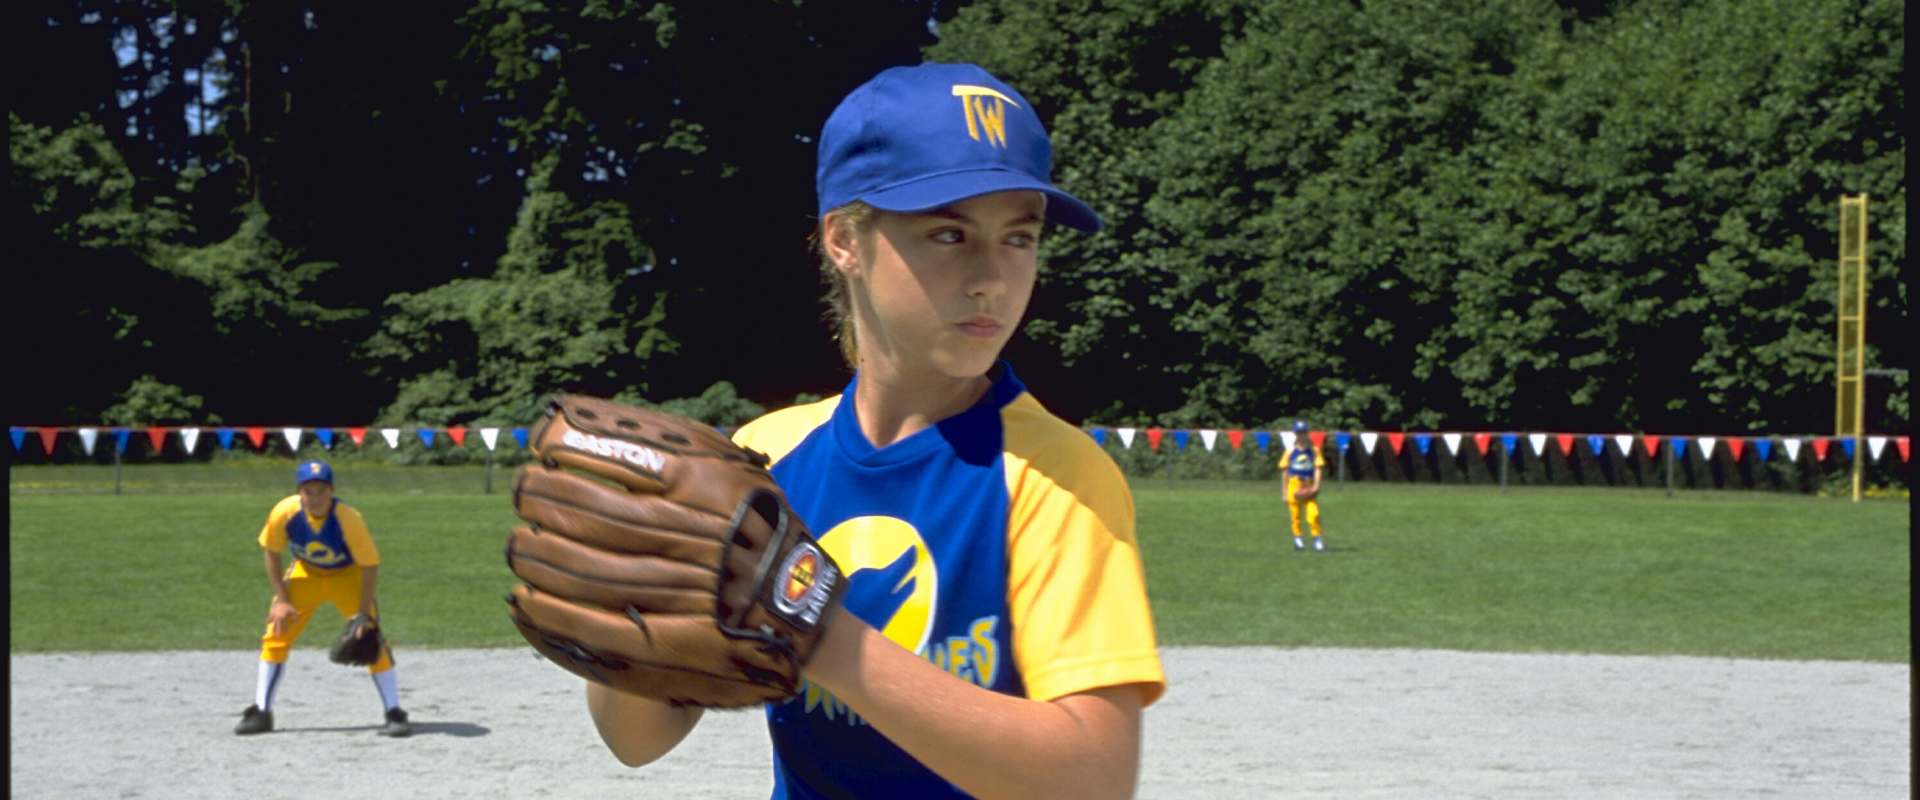 Air Bud: Seventh Inning Fetch background 2